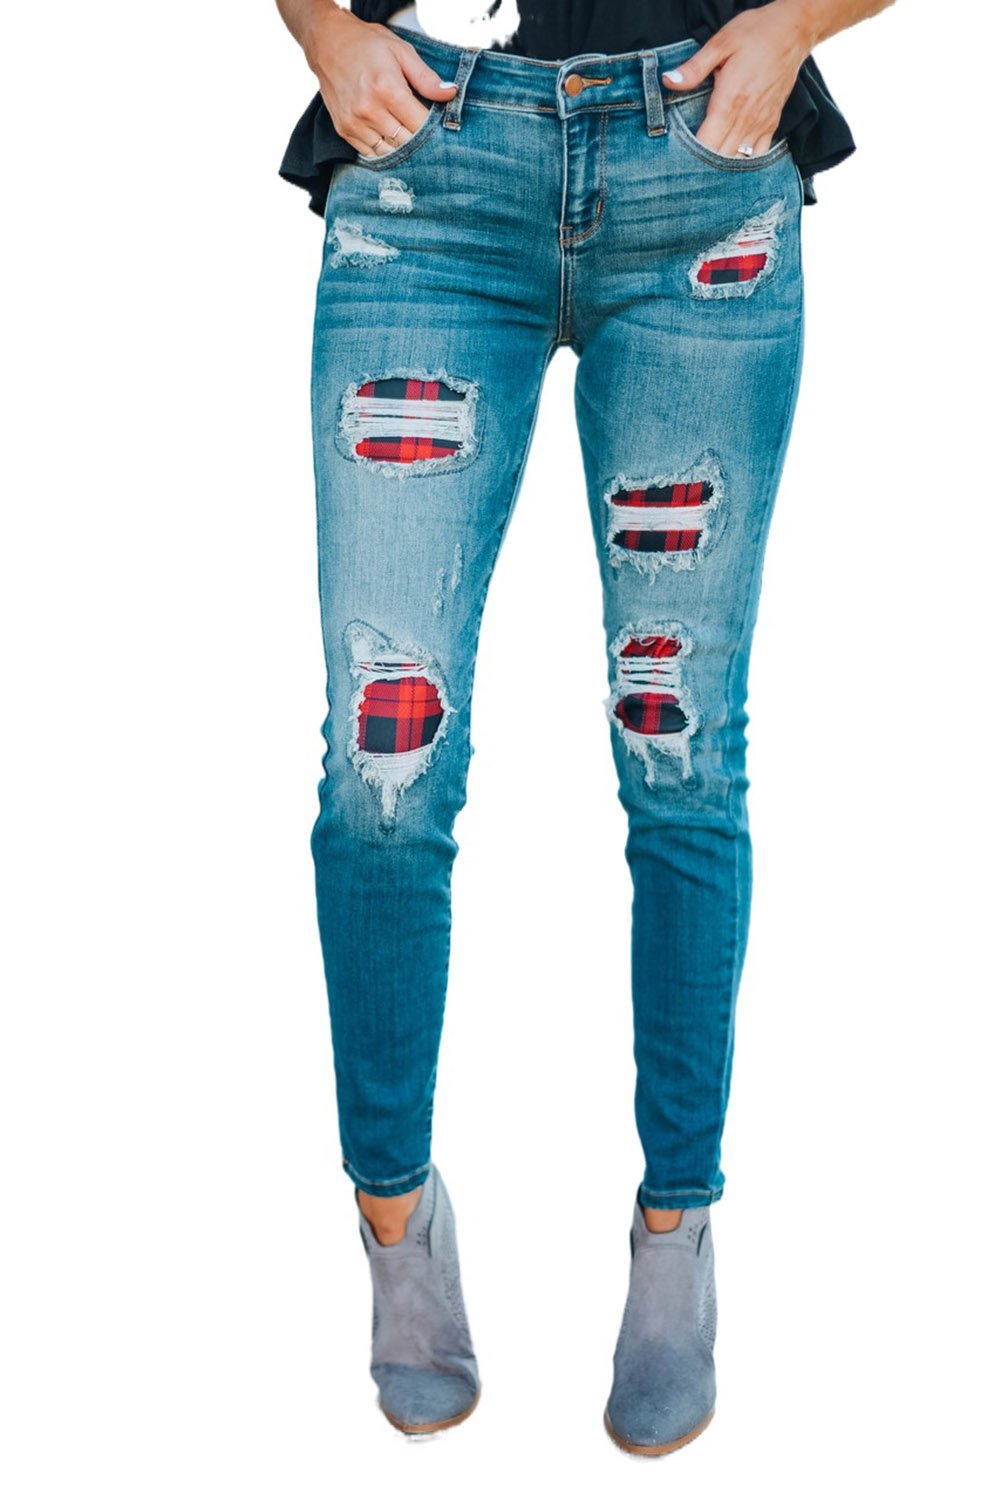 Women's Fashion Red Plaid Patch Destroyed Skinny Jeans